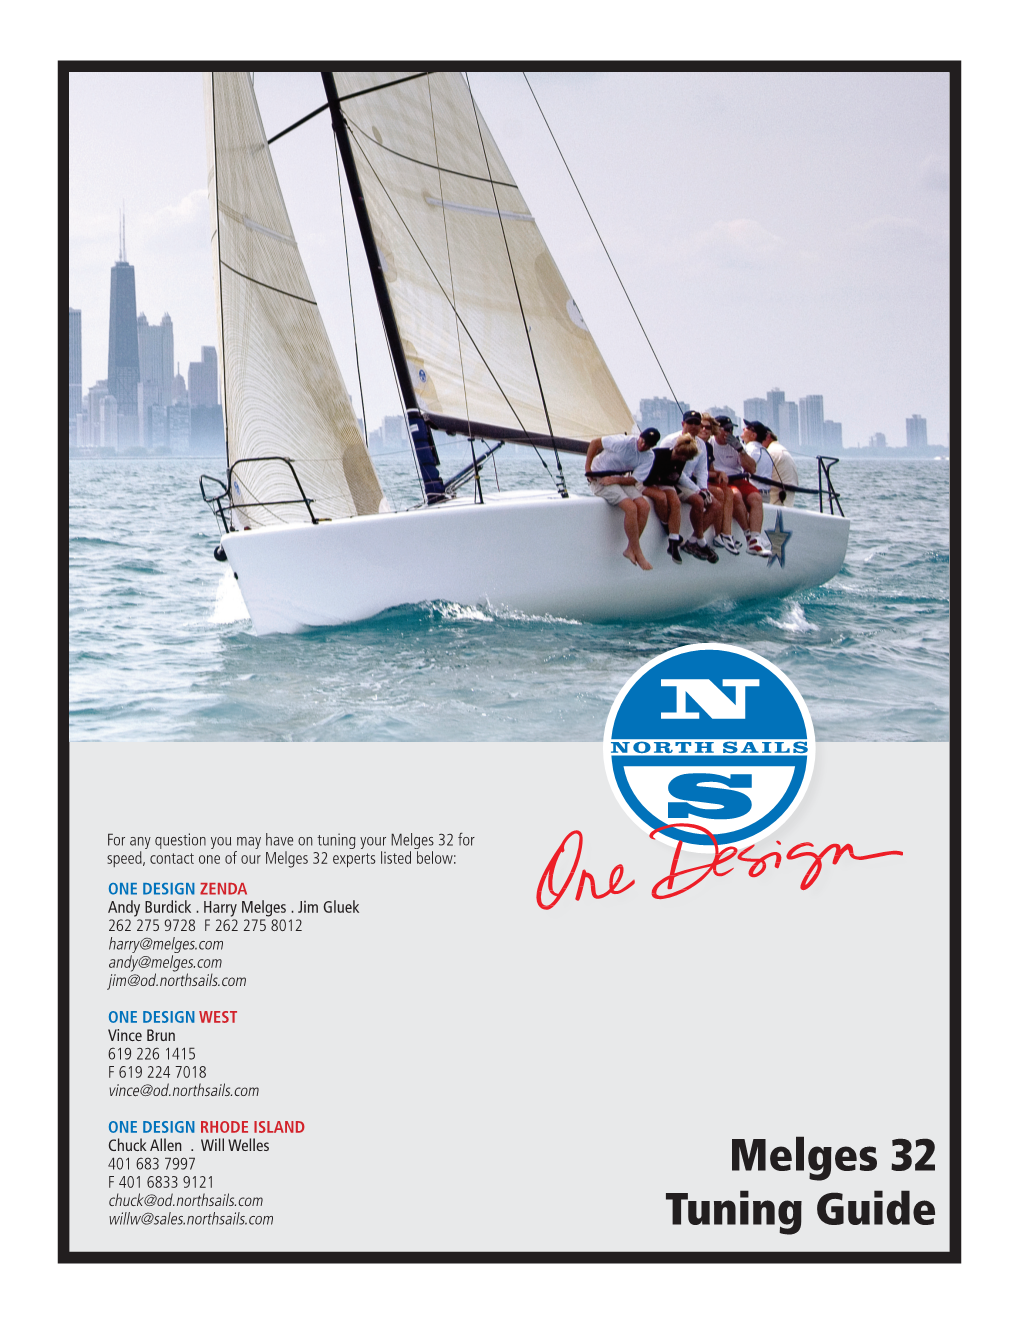 Melges 32 Tuning Guide